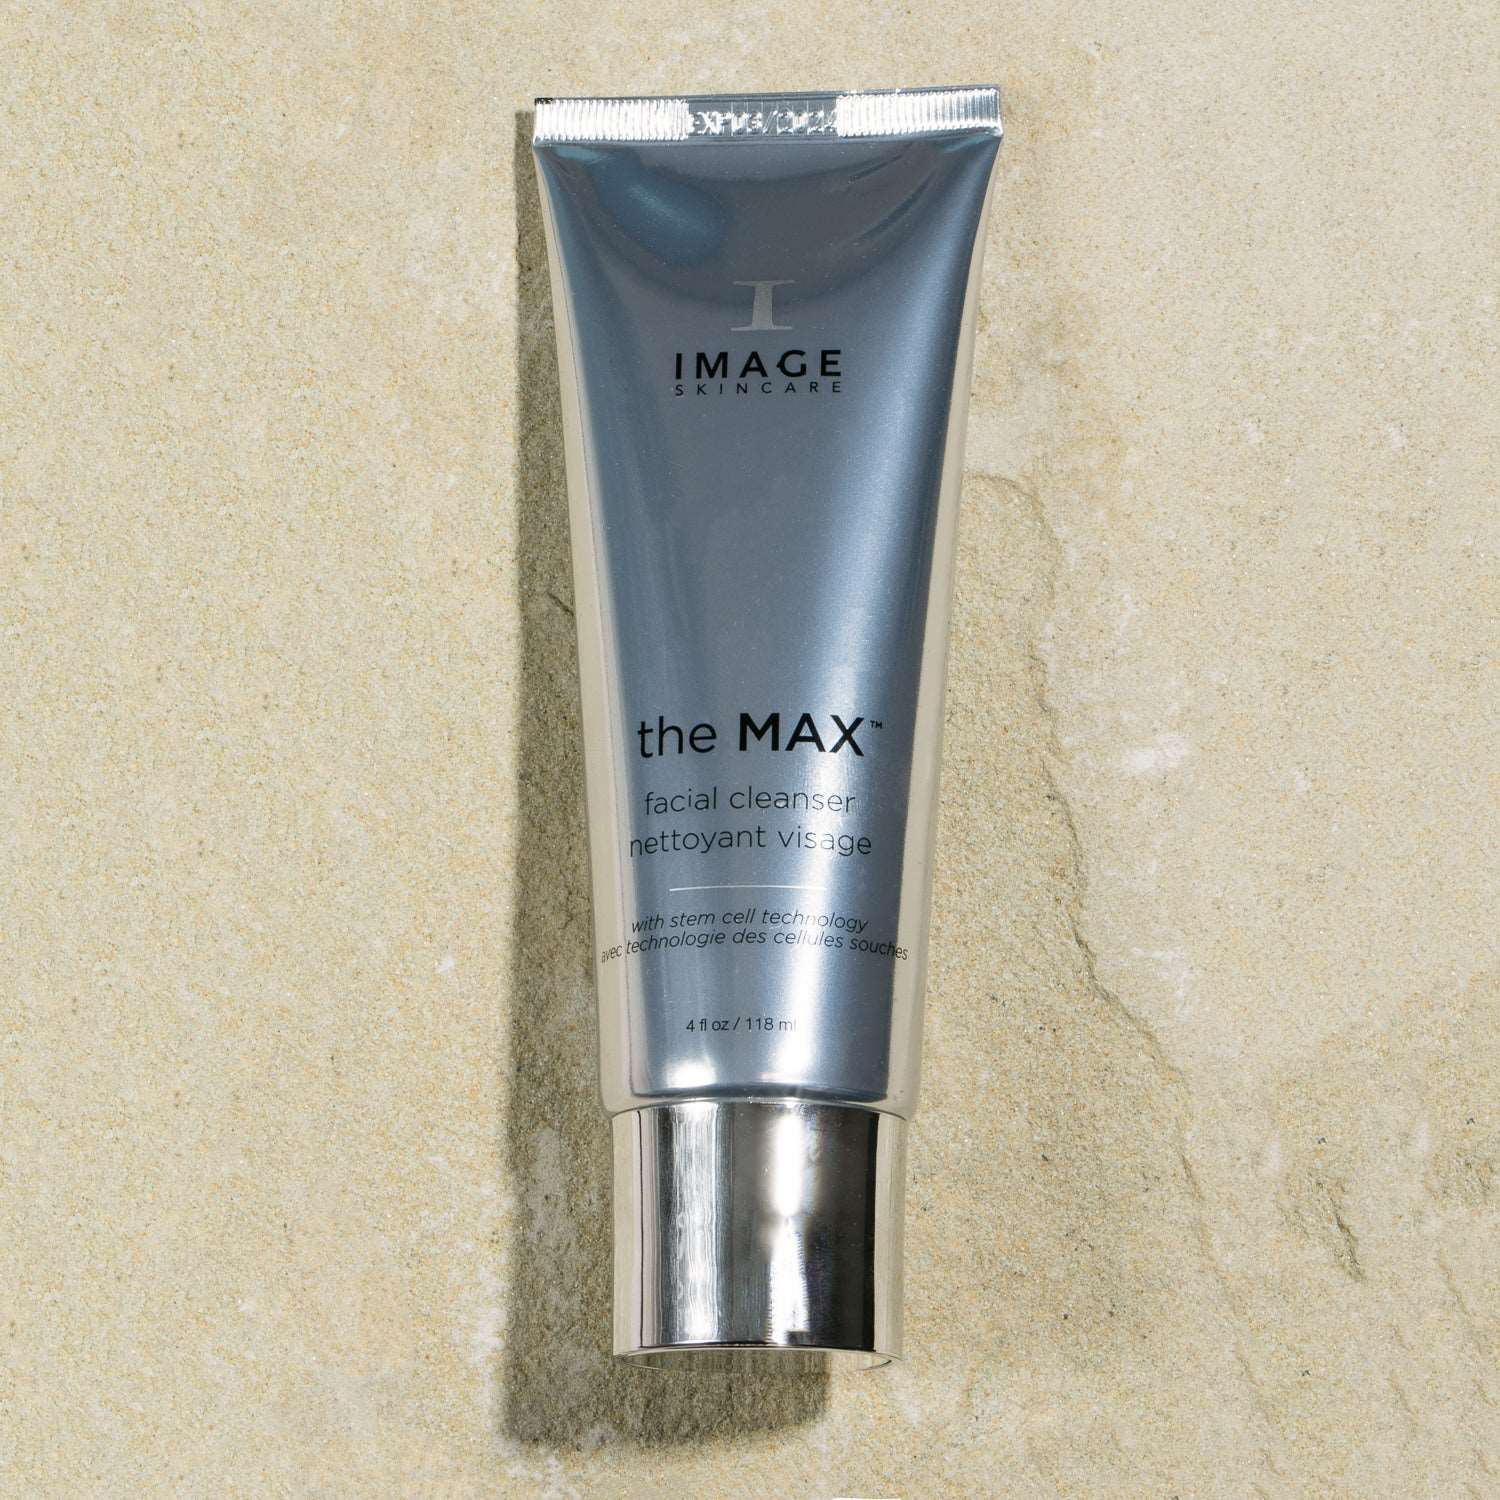 THE MAX Stem Cell Facial Cleanser 4oz Image Skincare